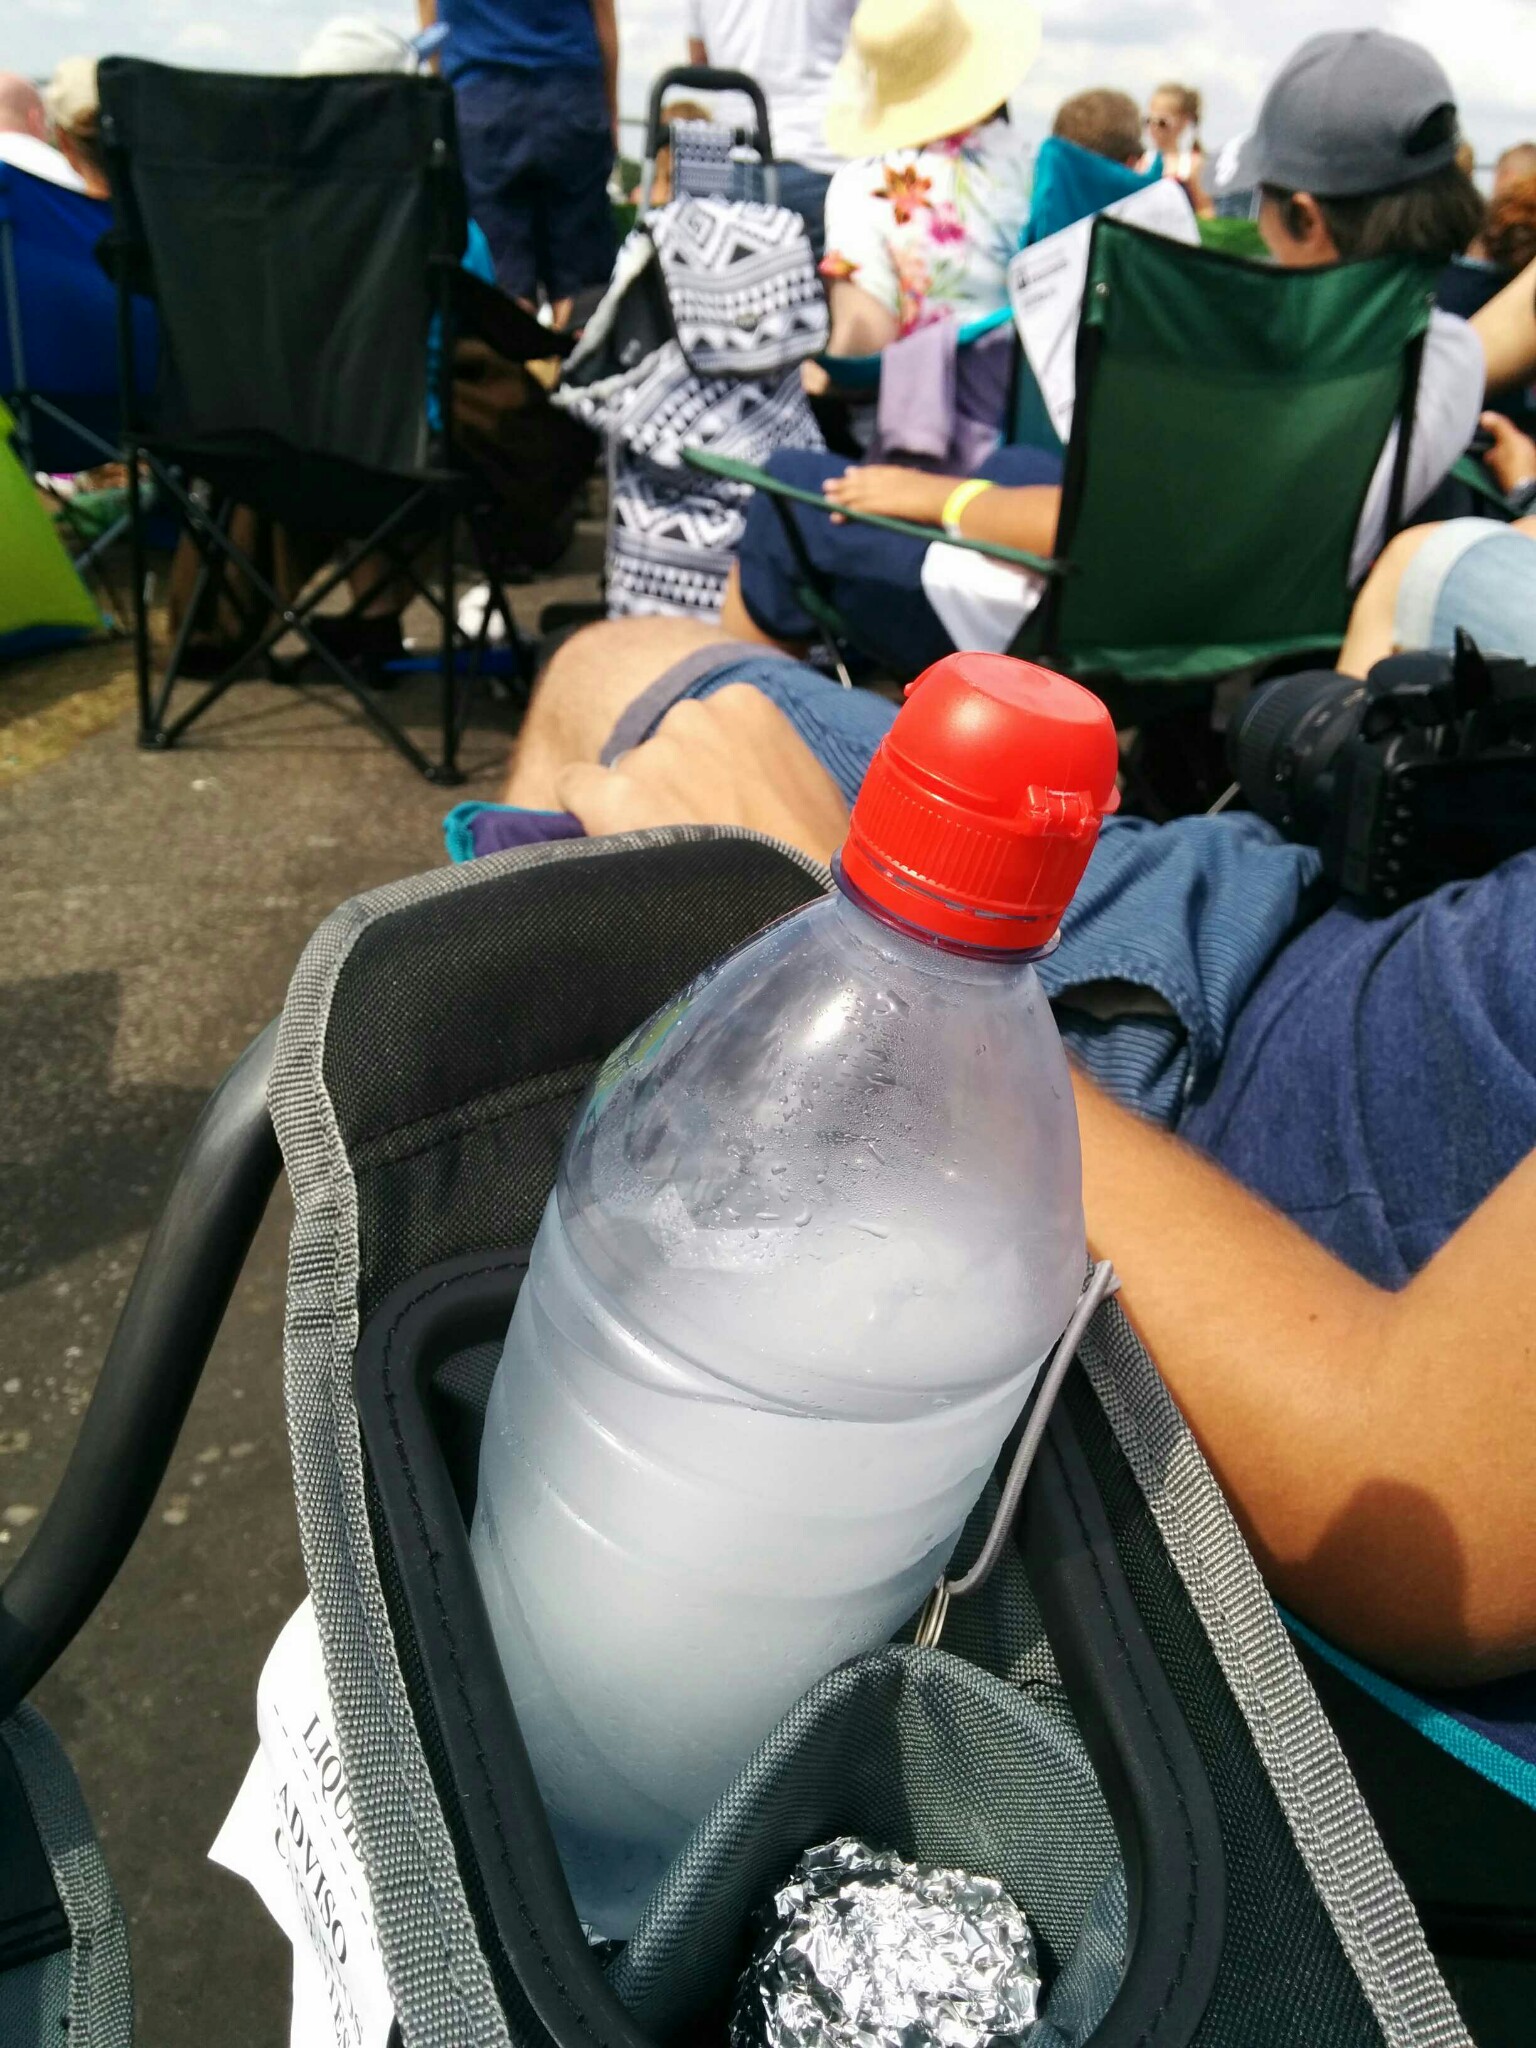 Sitting in the sun for several hours. Full marks to Tina for thinking of frozen water bottles.